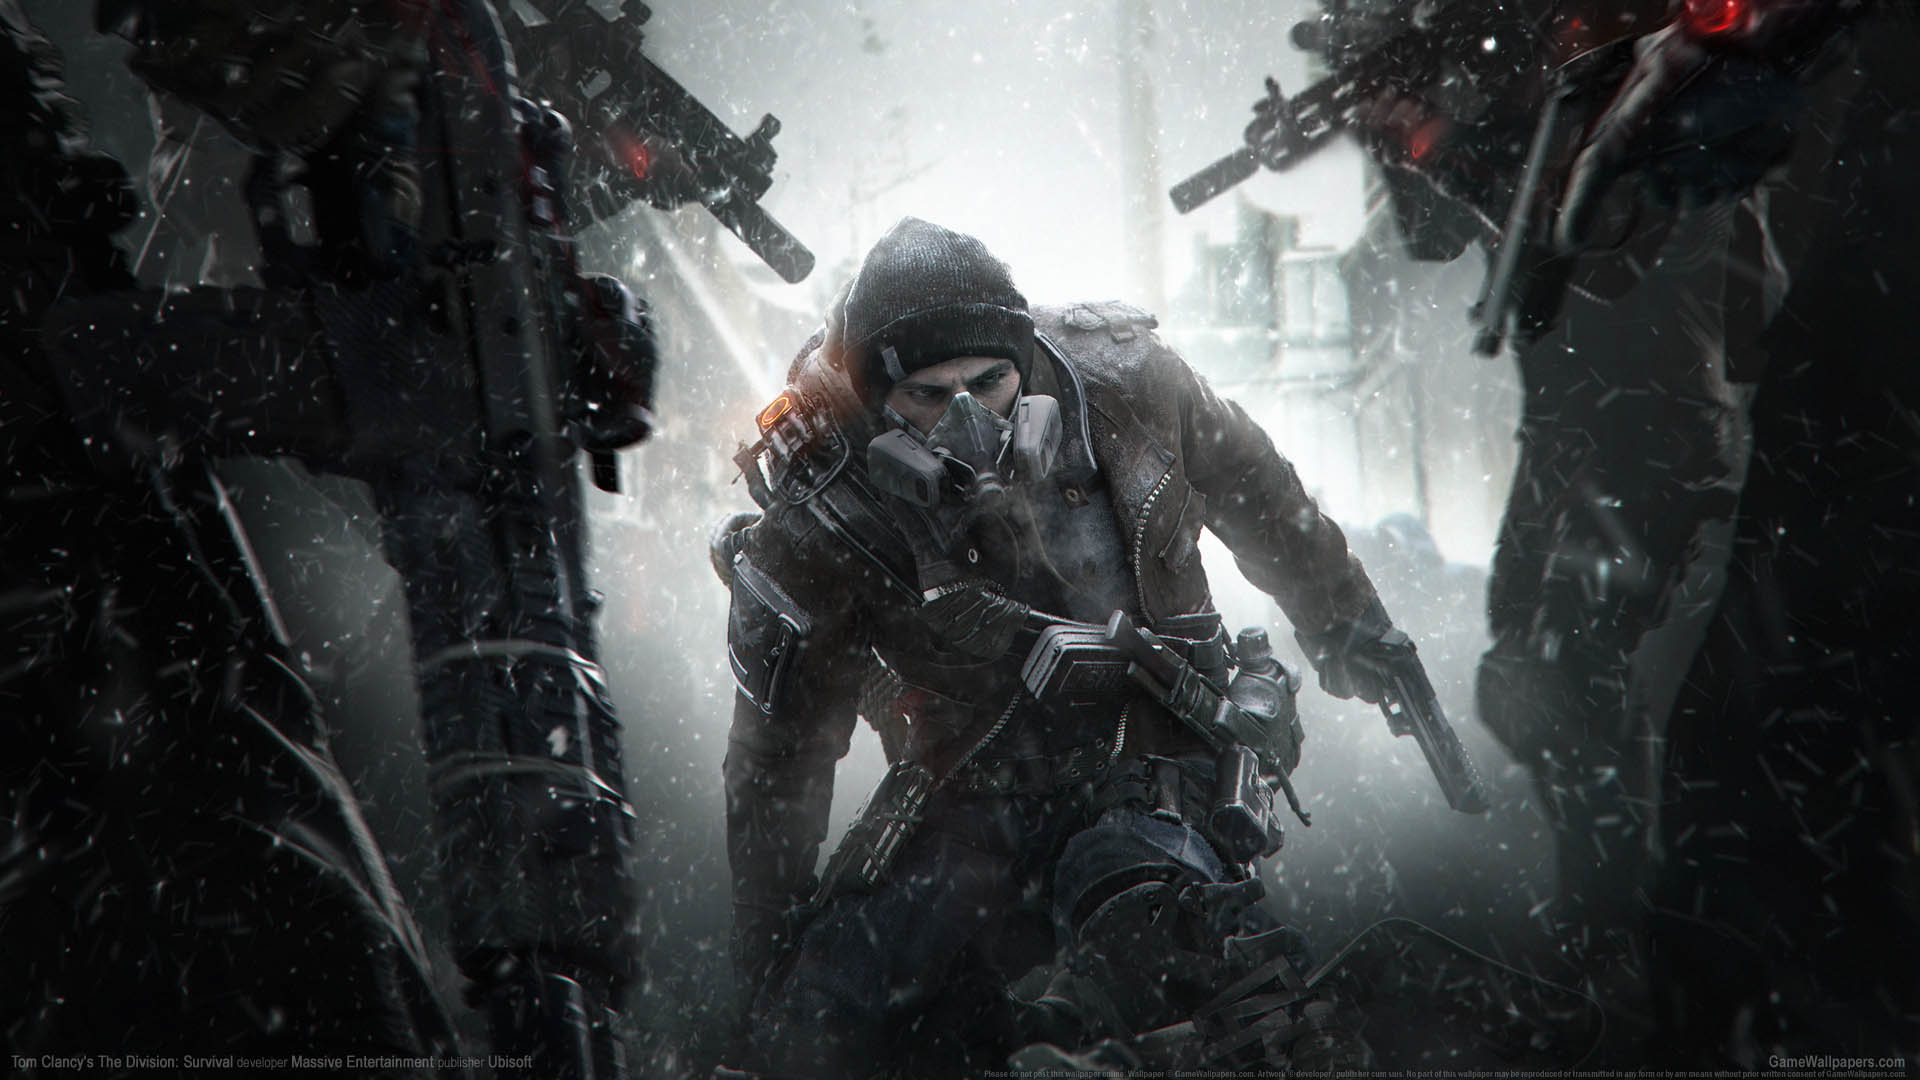 Tom Clancy's The Division: Survival wallpaper 01 1920x1080